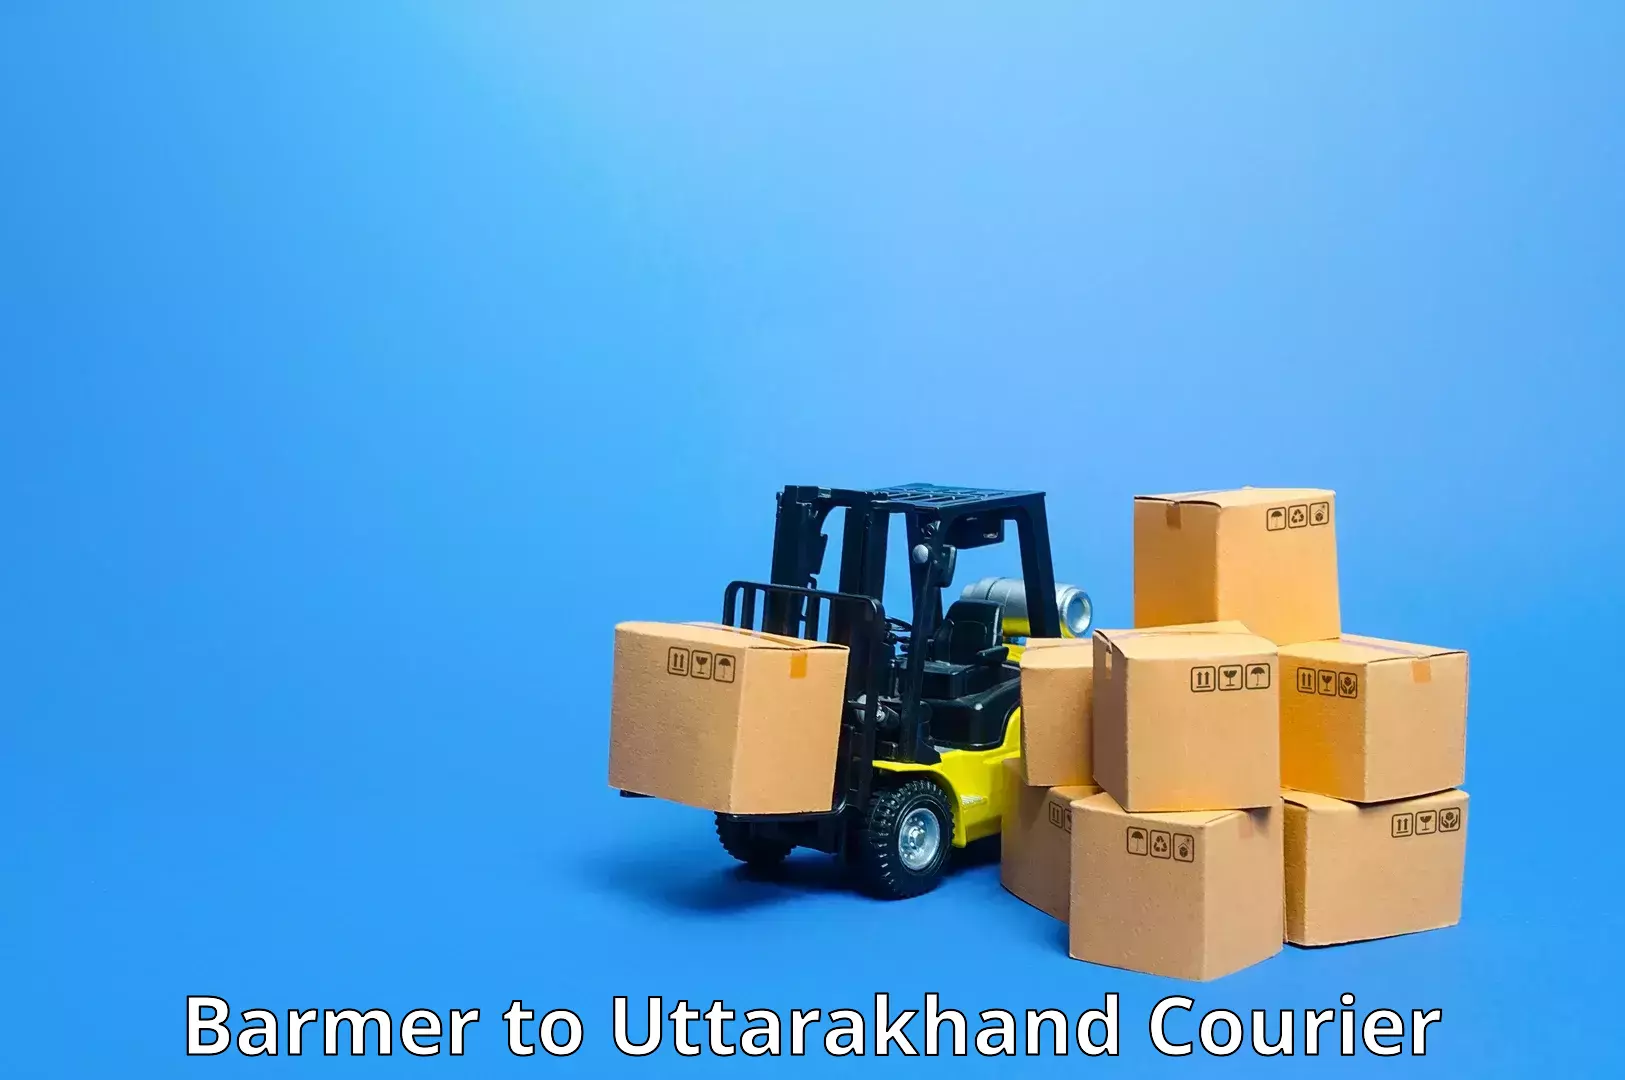 Round-the-clock parcel delivery Barmer to Uttarakhand